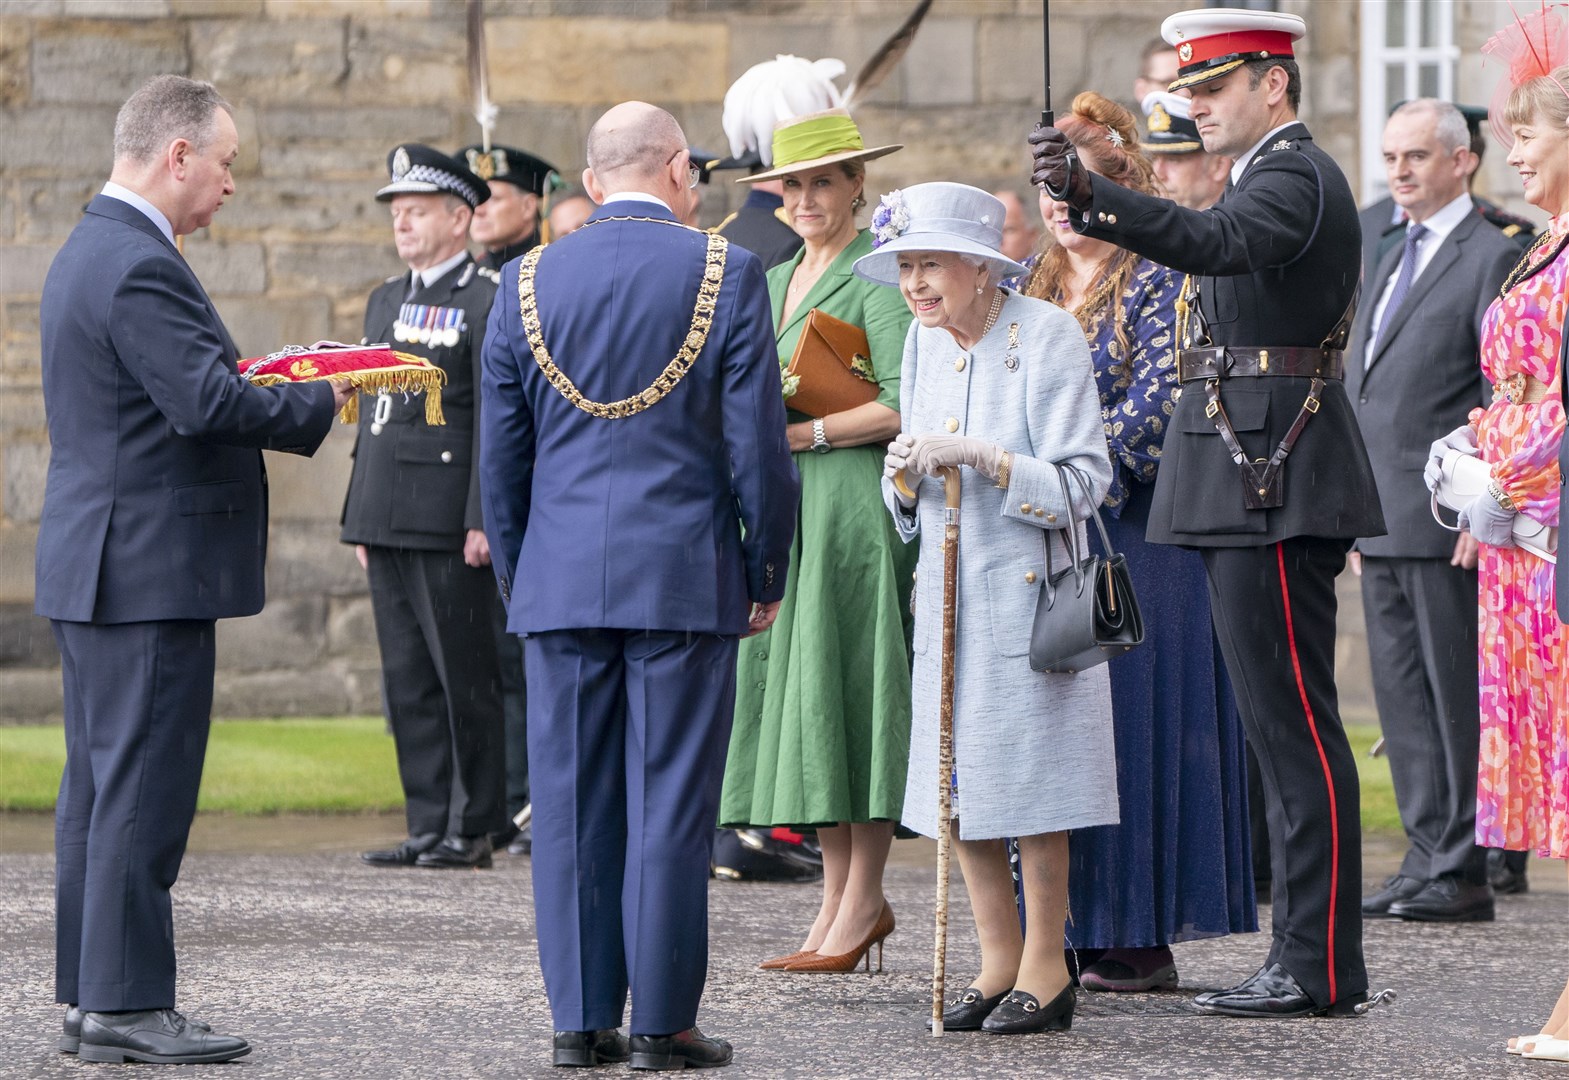 The Queen attends the Ceremony of the Keys on the forecourt of the Palace of Holyroodhouse in Edinburgh (Jane Barlow/PA)